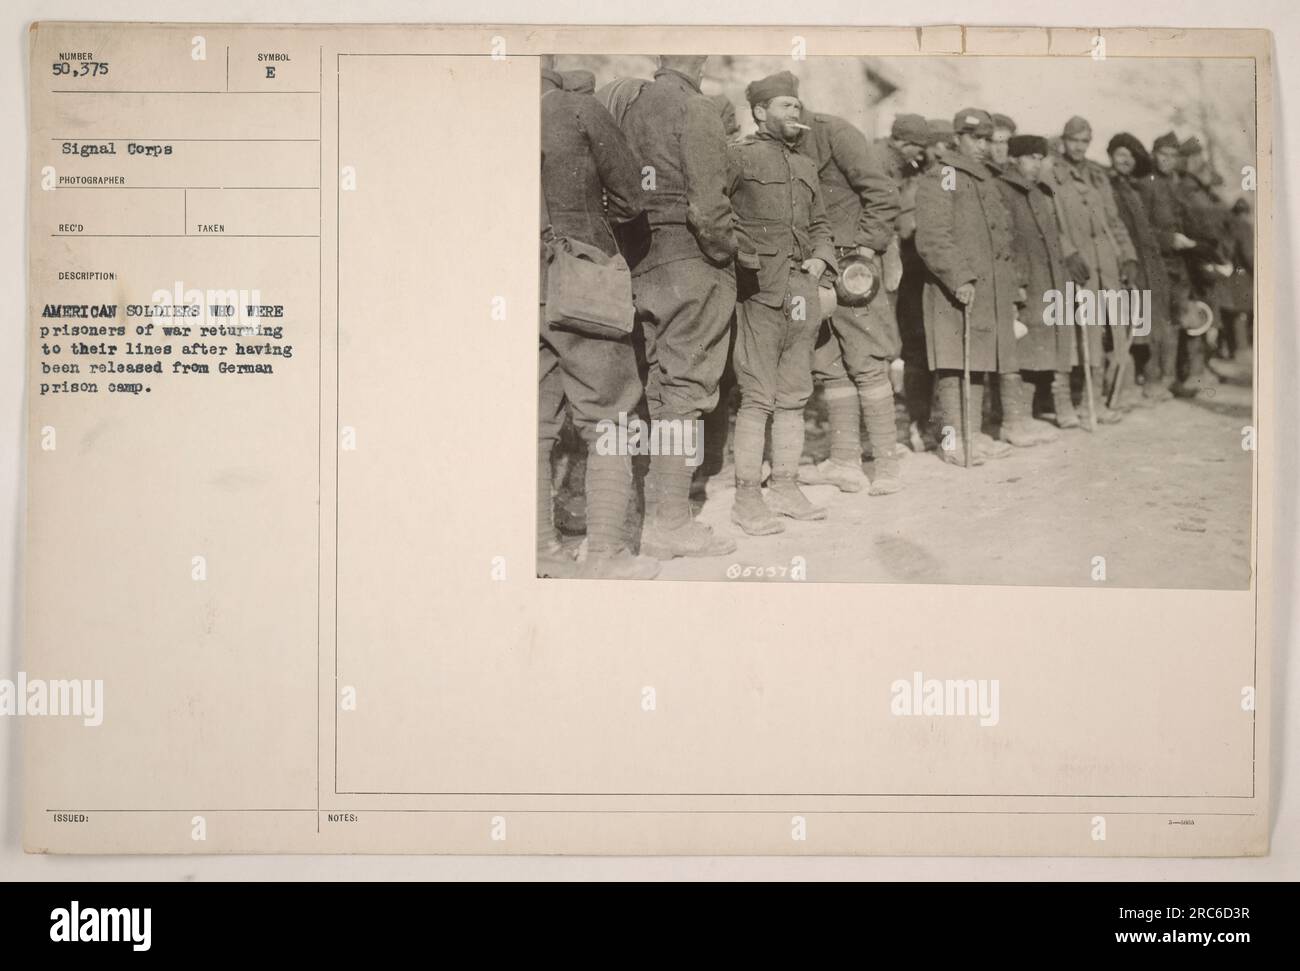 American soldiers who were prisoners of war returning to their lines after having been released from a German prison camp. Photo taken by the Signal Corps photographer SECO. The image is part of the collection issued with the symbol B and bears the notes 150375. Stock Photo